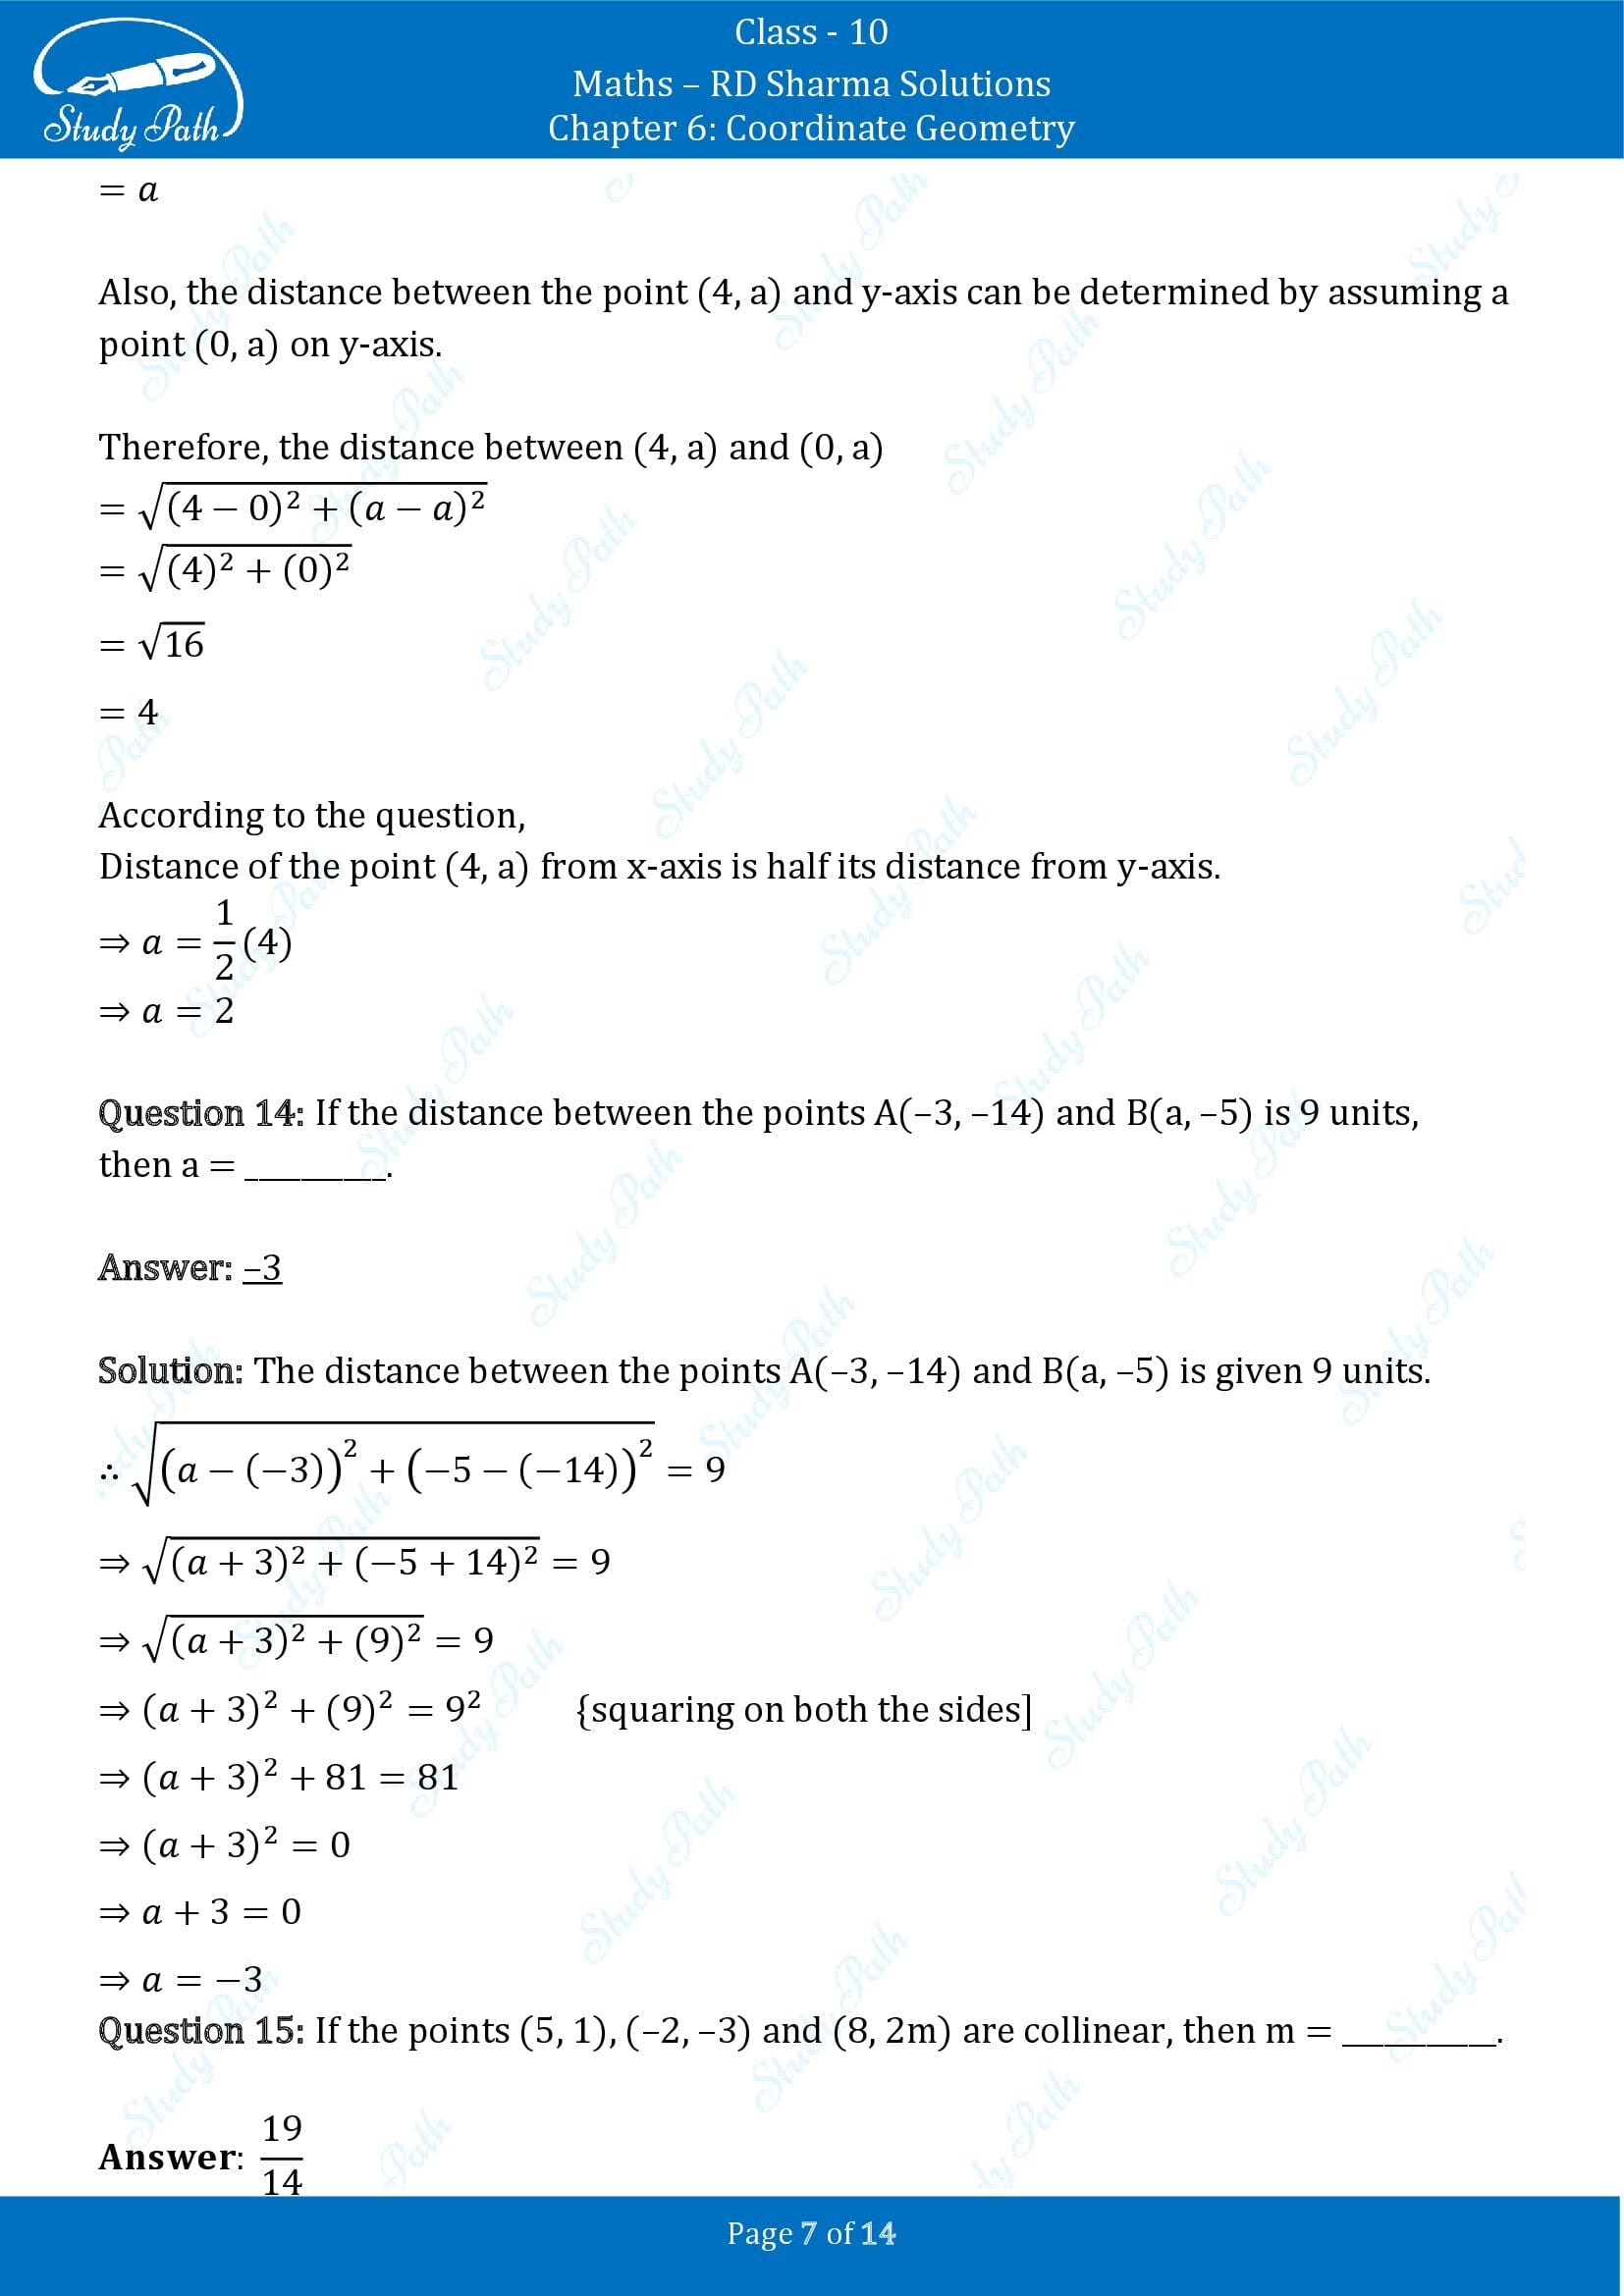 RD Sharma Solutions Class 10 Chapter 6 Coordinate Geometry Fill in the Blank Type Questions FBQs 00007